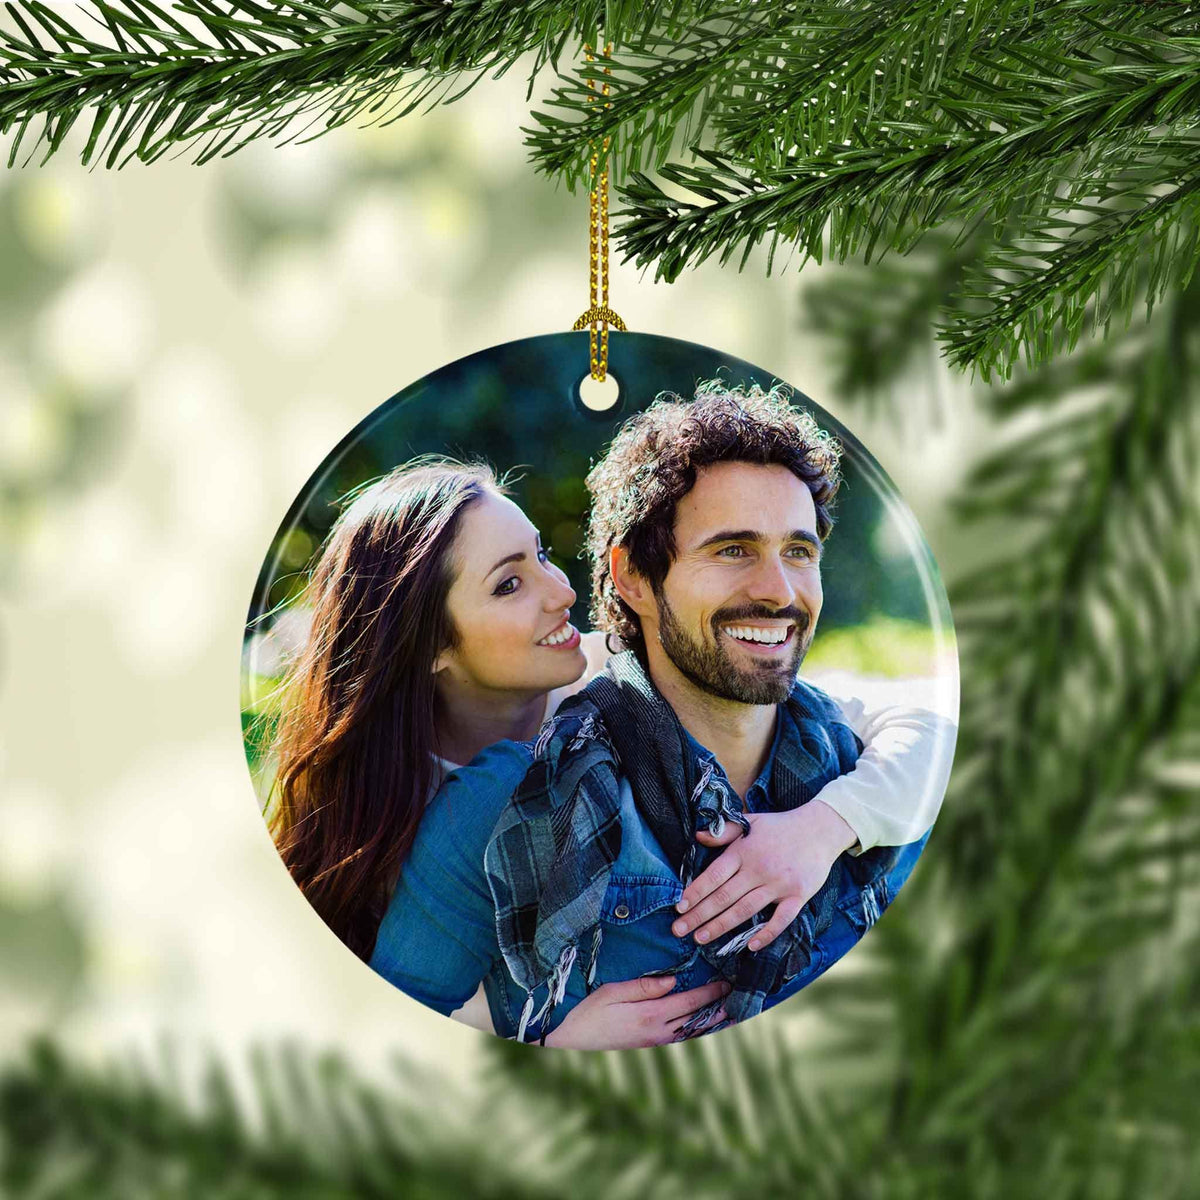 Photo Holiday Ornaments | Personalized Christmas Ornaments | First Christmas Engaged Blue Flowers Round